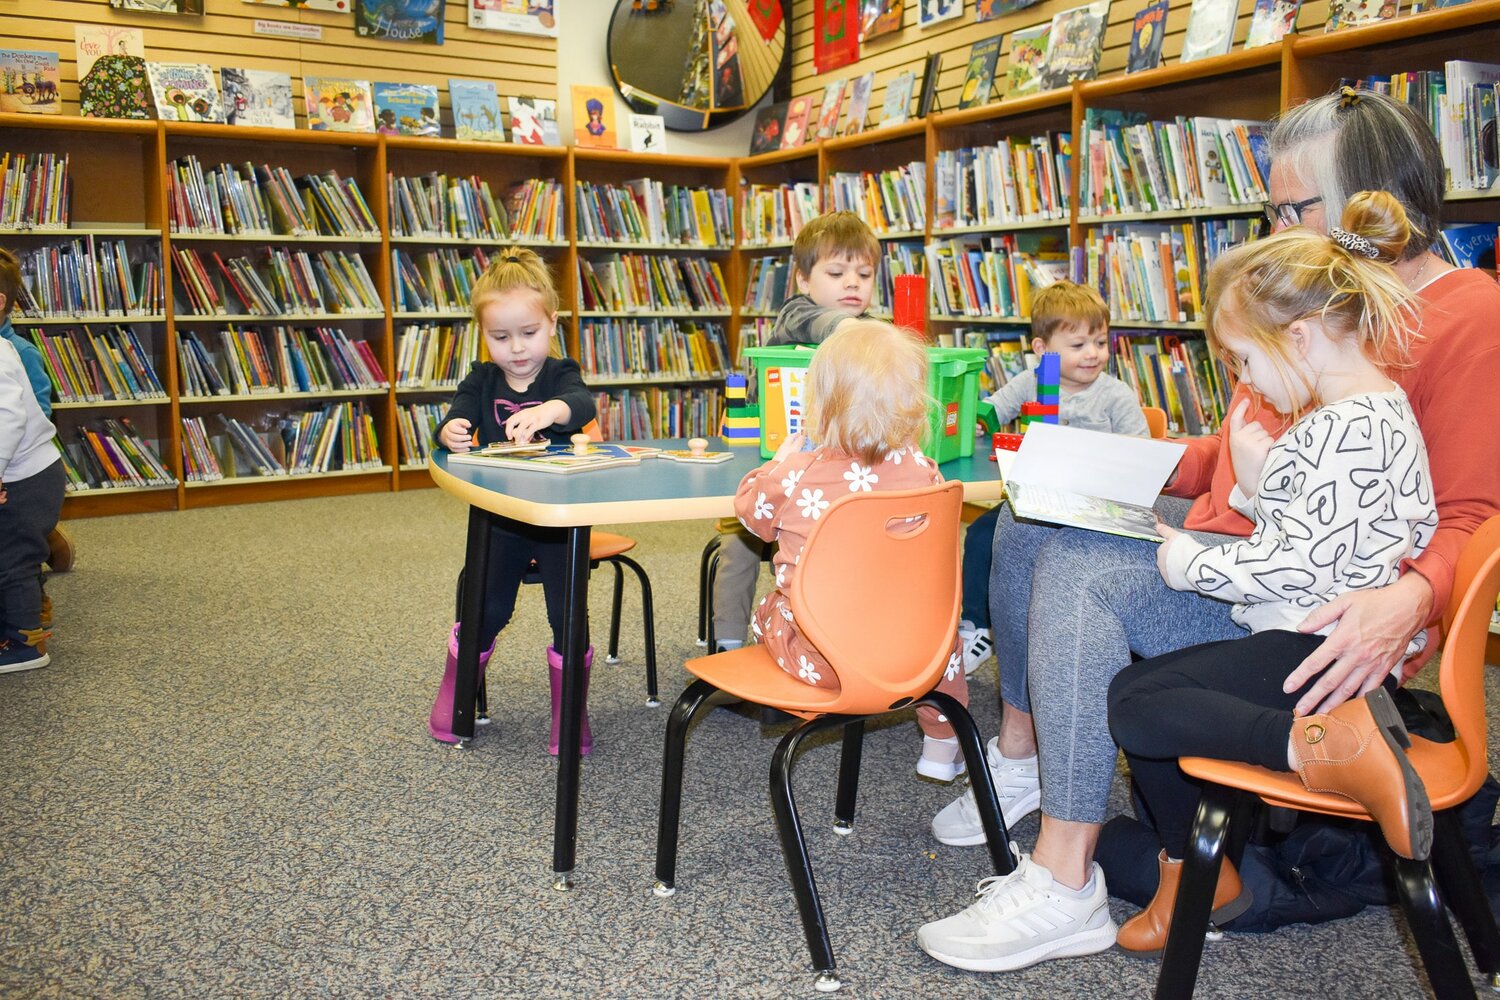 The library remains the epicenter of rentals. Along with books, both hard copy and digital, residents can borrow DVDs, Launchpad tablets for kids, Chromebooks and fishing poles. They can also get free gun locks and COVID tests.